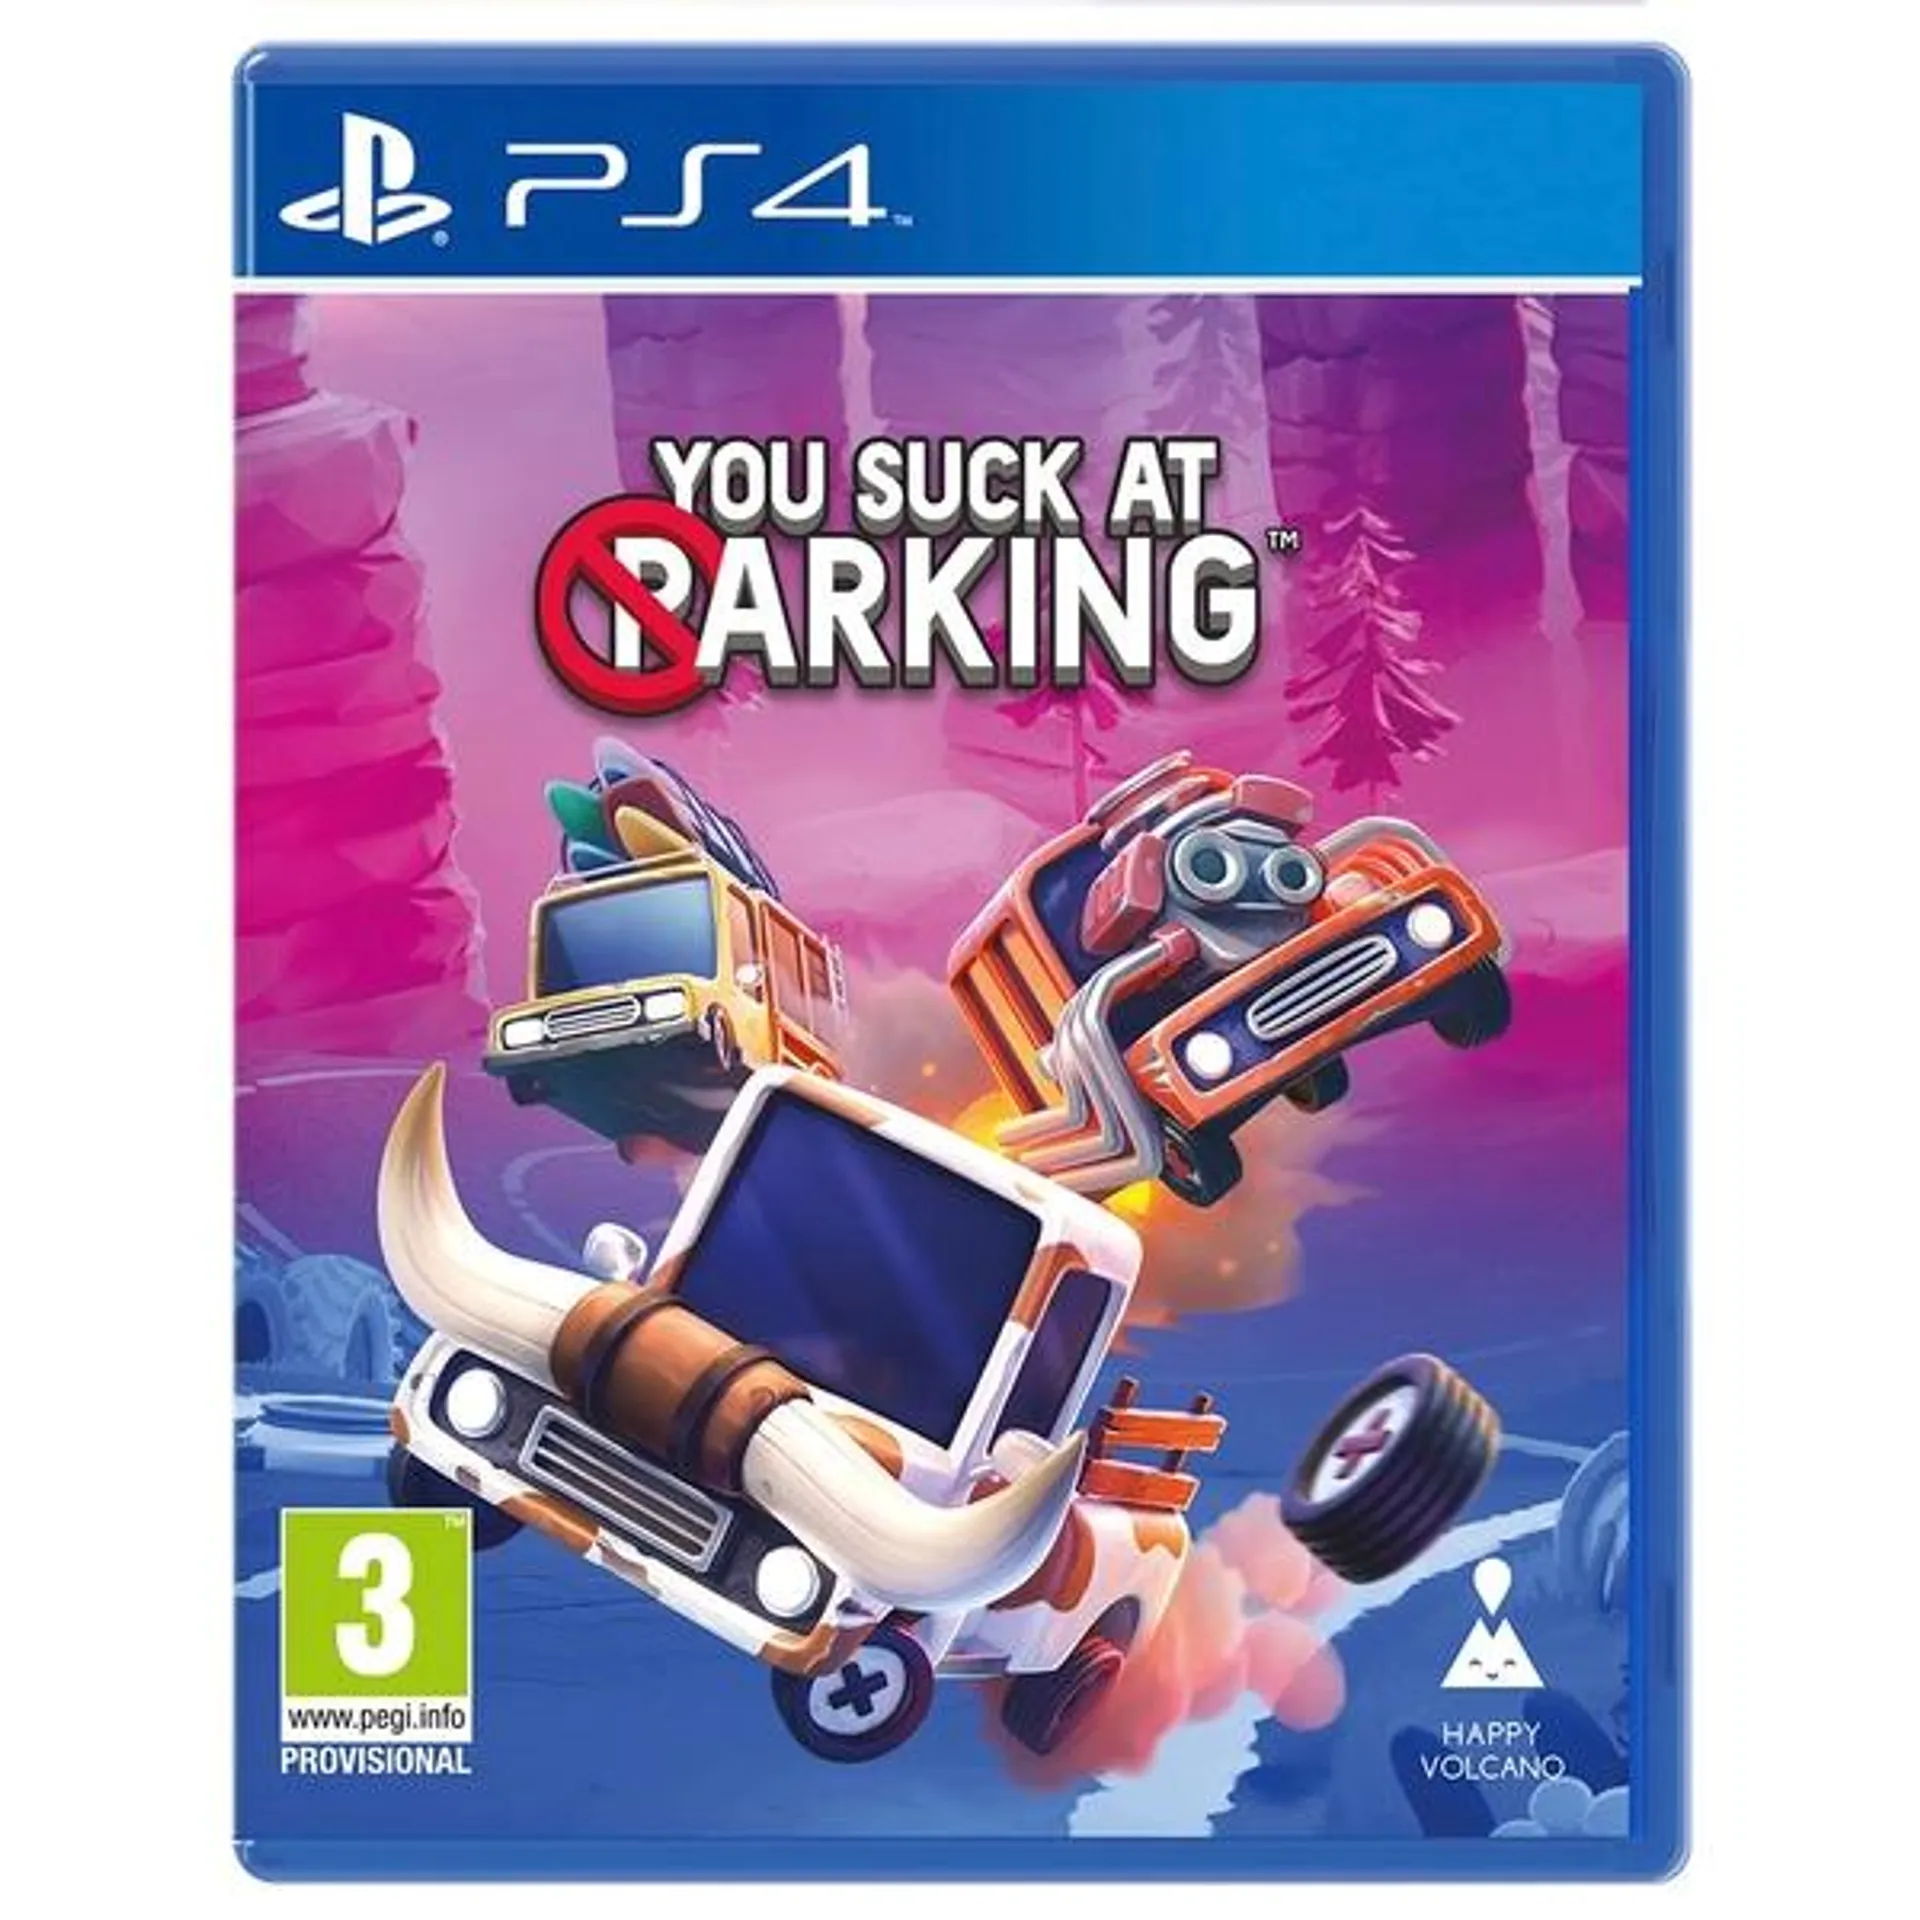 You Suck at Parking PS4